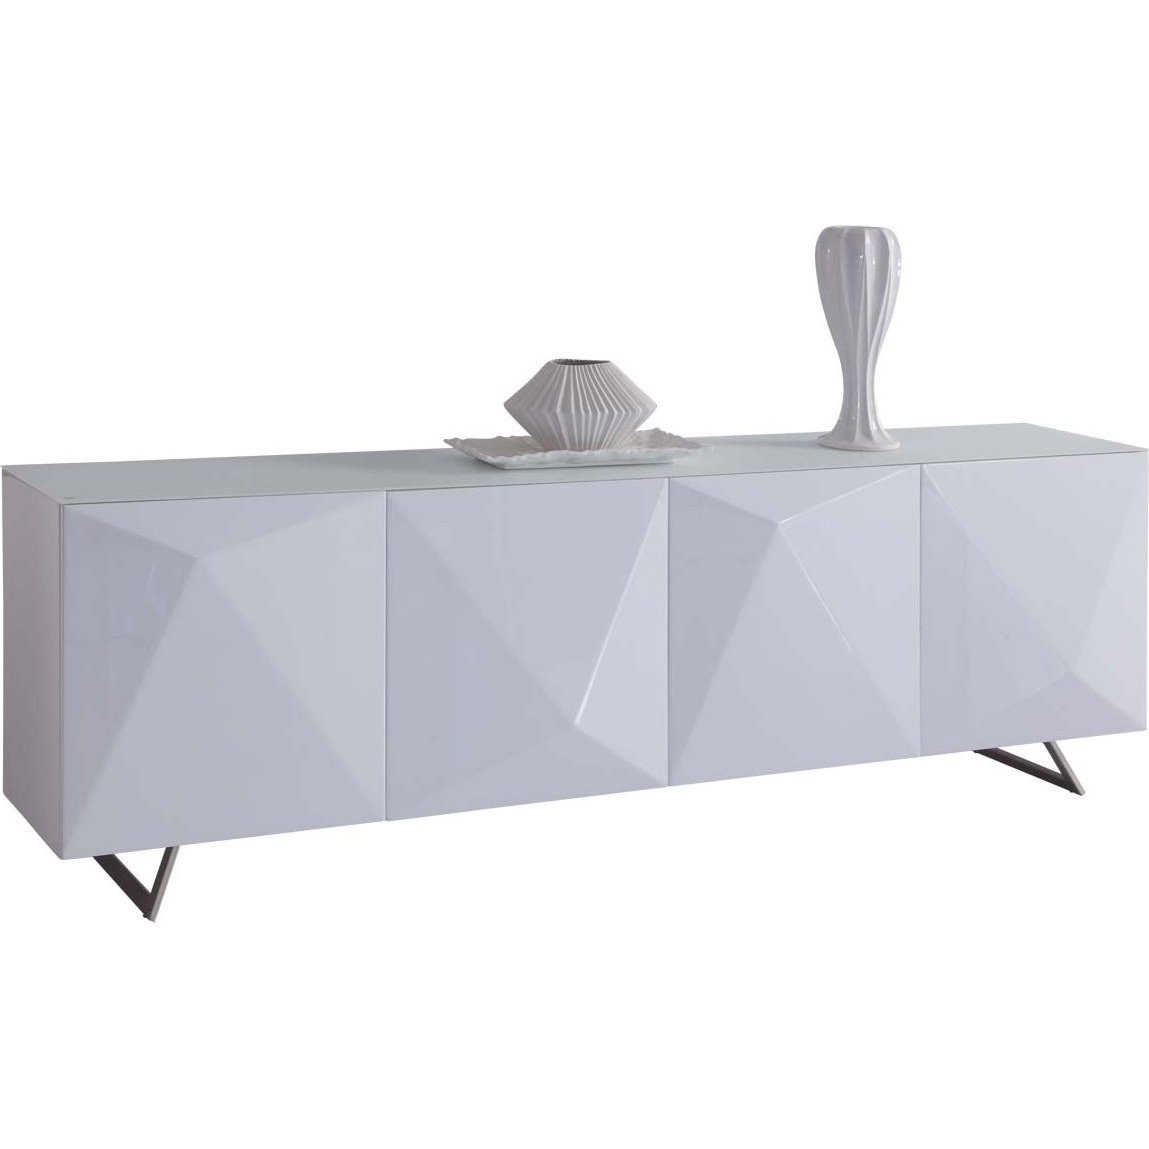 Whiteline Modern Living Sb1193-gry 30 X 94 X 18 In. Samantha 5 Mm Crystal Pure Tempered Gray Glass Top Buffet